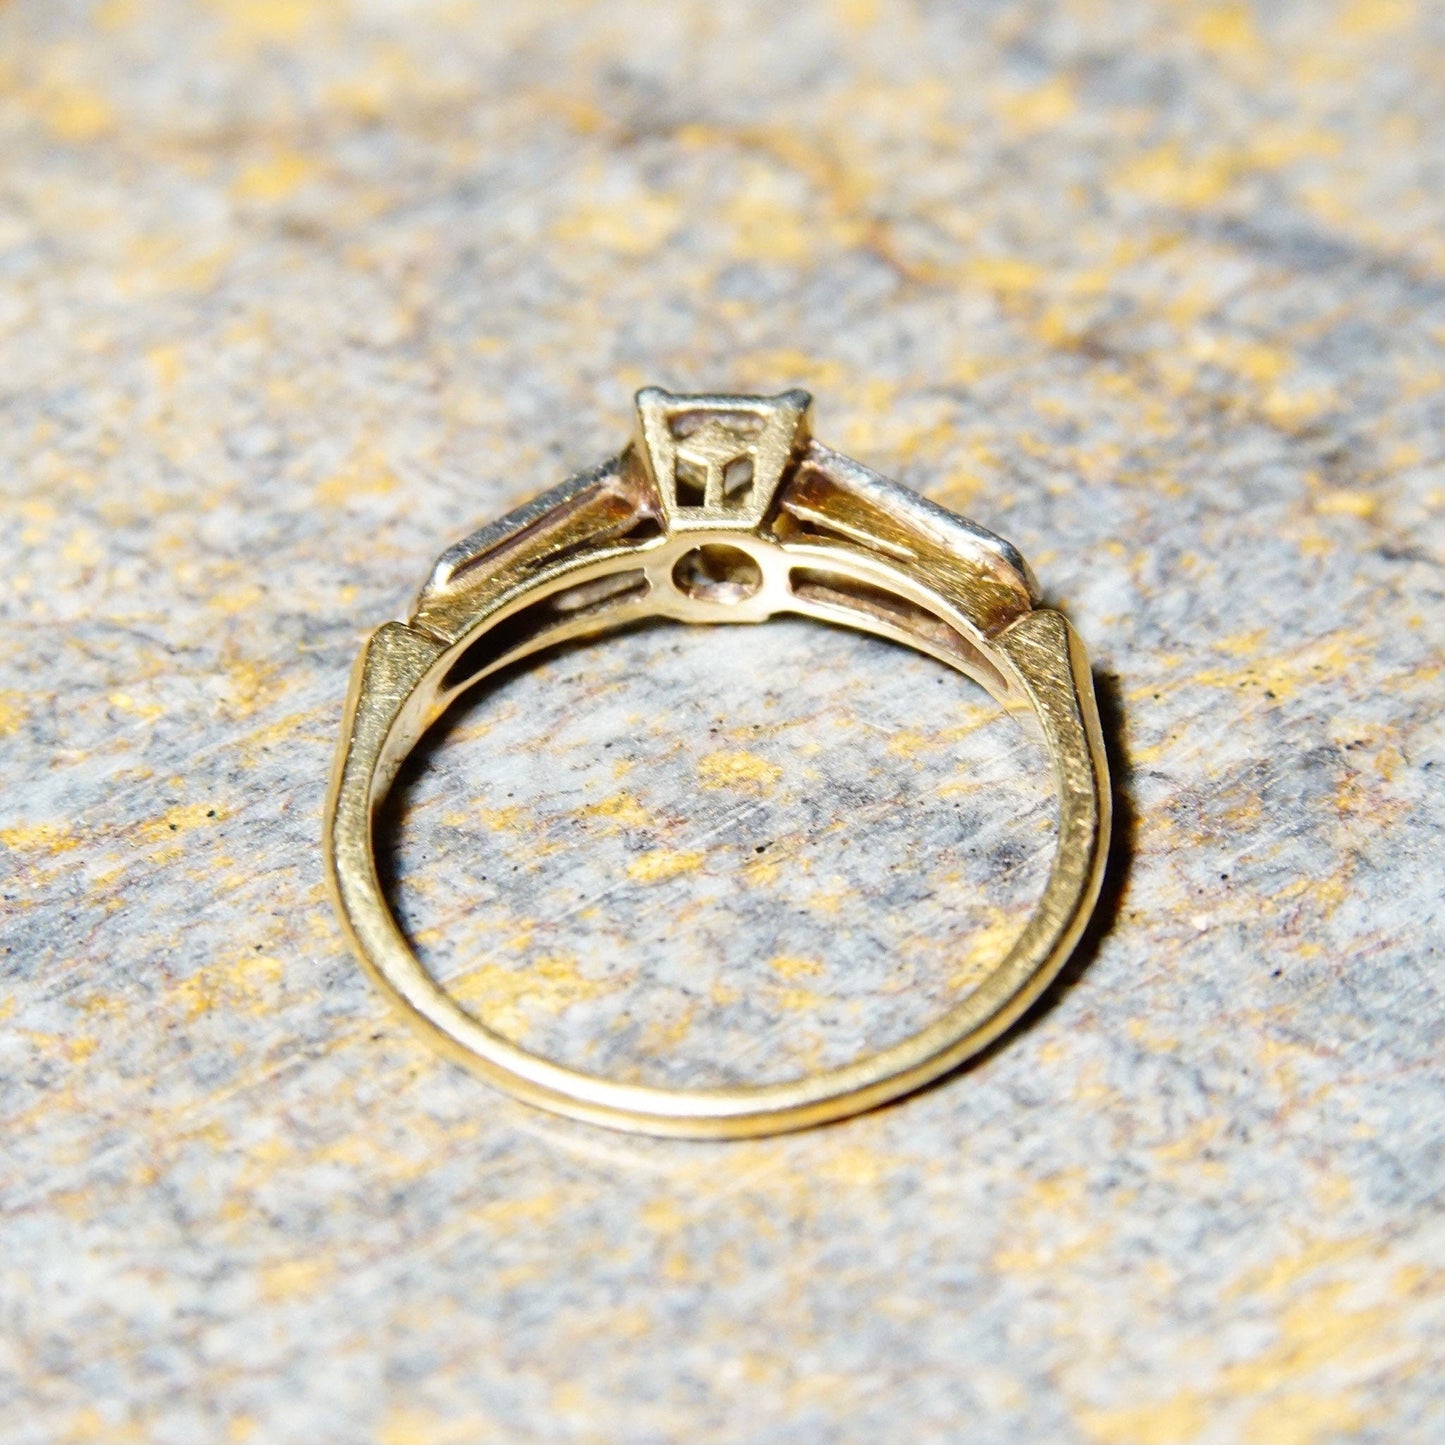 Vintage 14K and 18K gold diamond engagement ring with yellow gold band and white gold settings, featuring a 0.14 carat old European cut center stone, ring size 6 1/4 US.